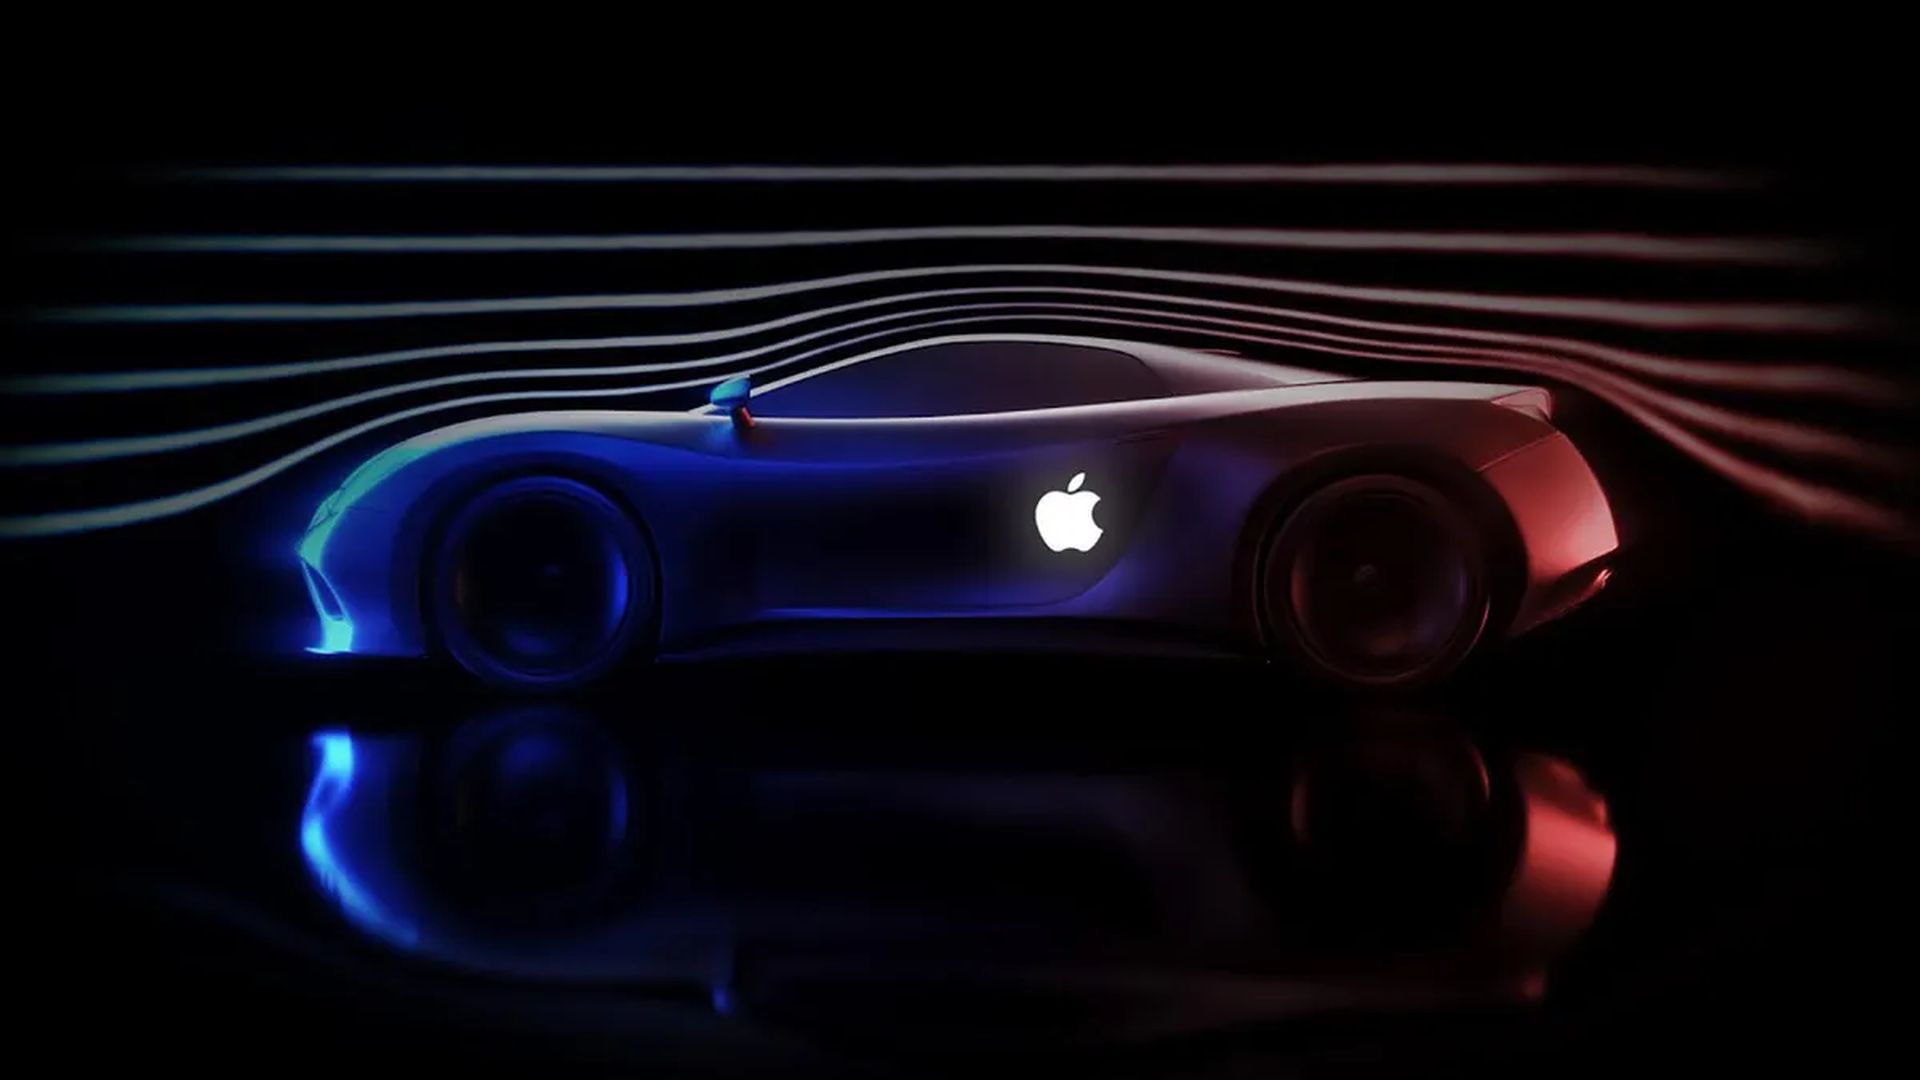 Apple Car to be released in 2022 with a price tag below $100,000